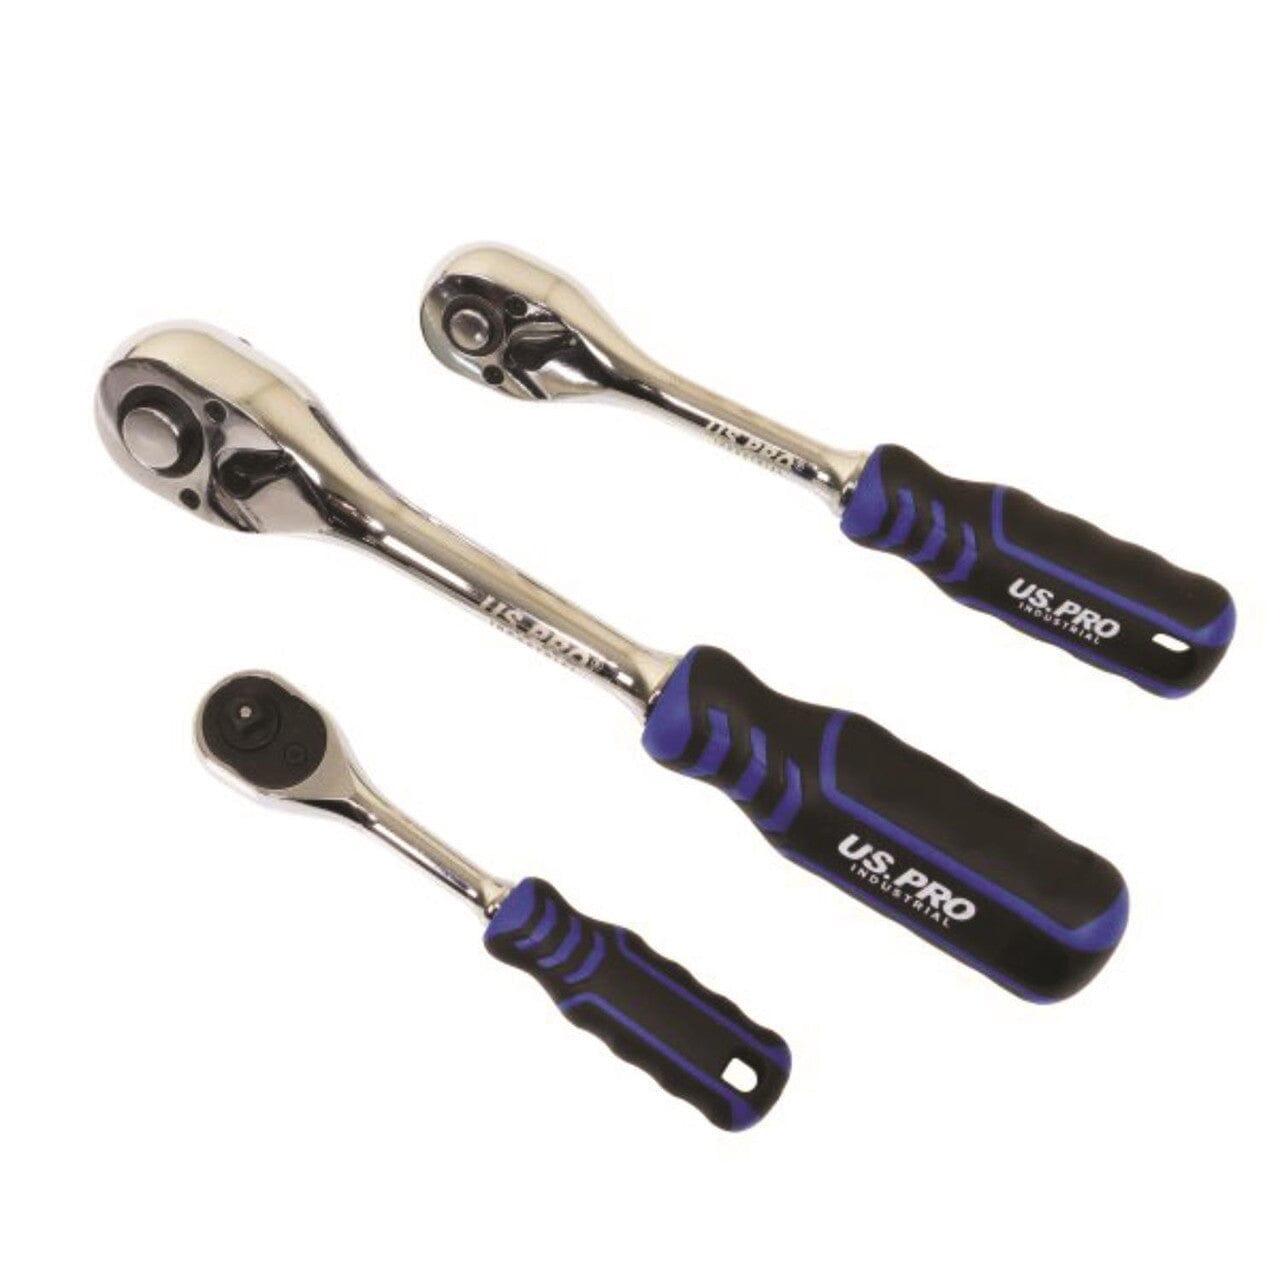 US PRO INDUSTRIAL Ratchet Handle Set 90T 1/4" 3/8" 1/2" Drive Soft Grip Socket Wrenches 4230 - Tools 2U Direct SW